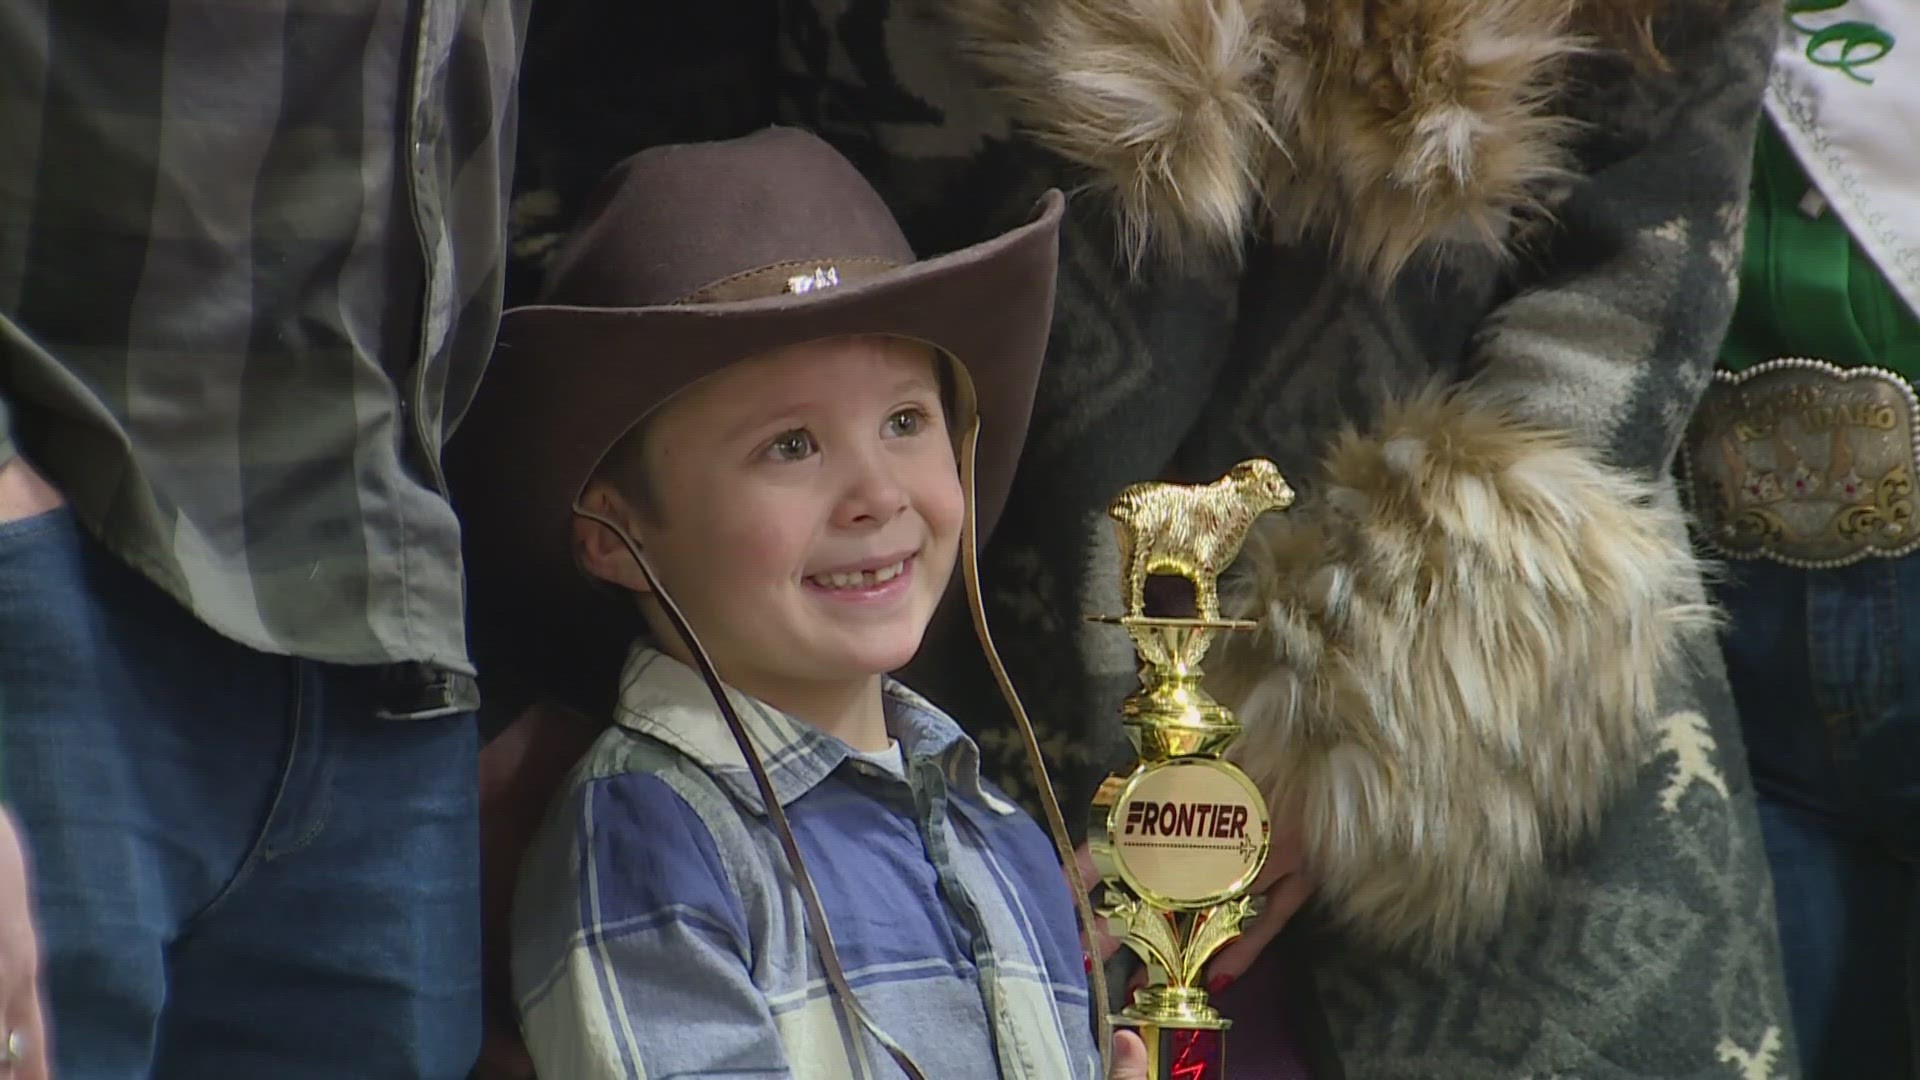 Corey Rose's son participated in the mutton bustin' fun at this year's National Western Stock Show.